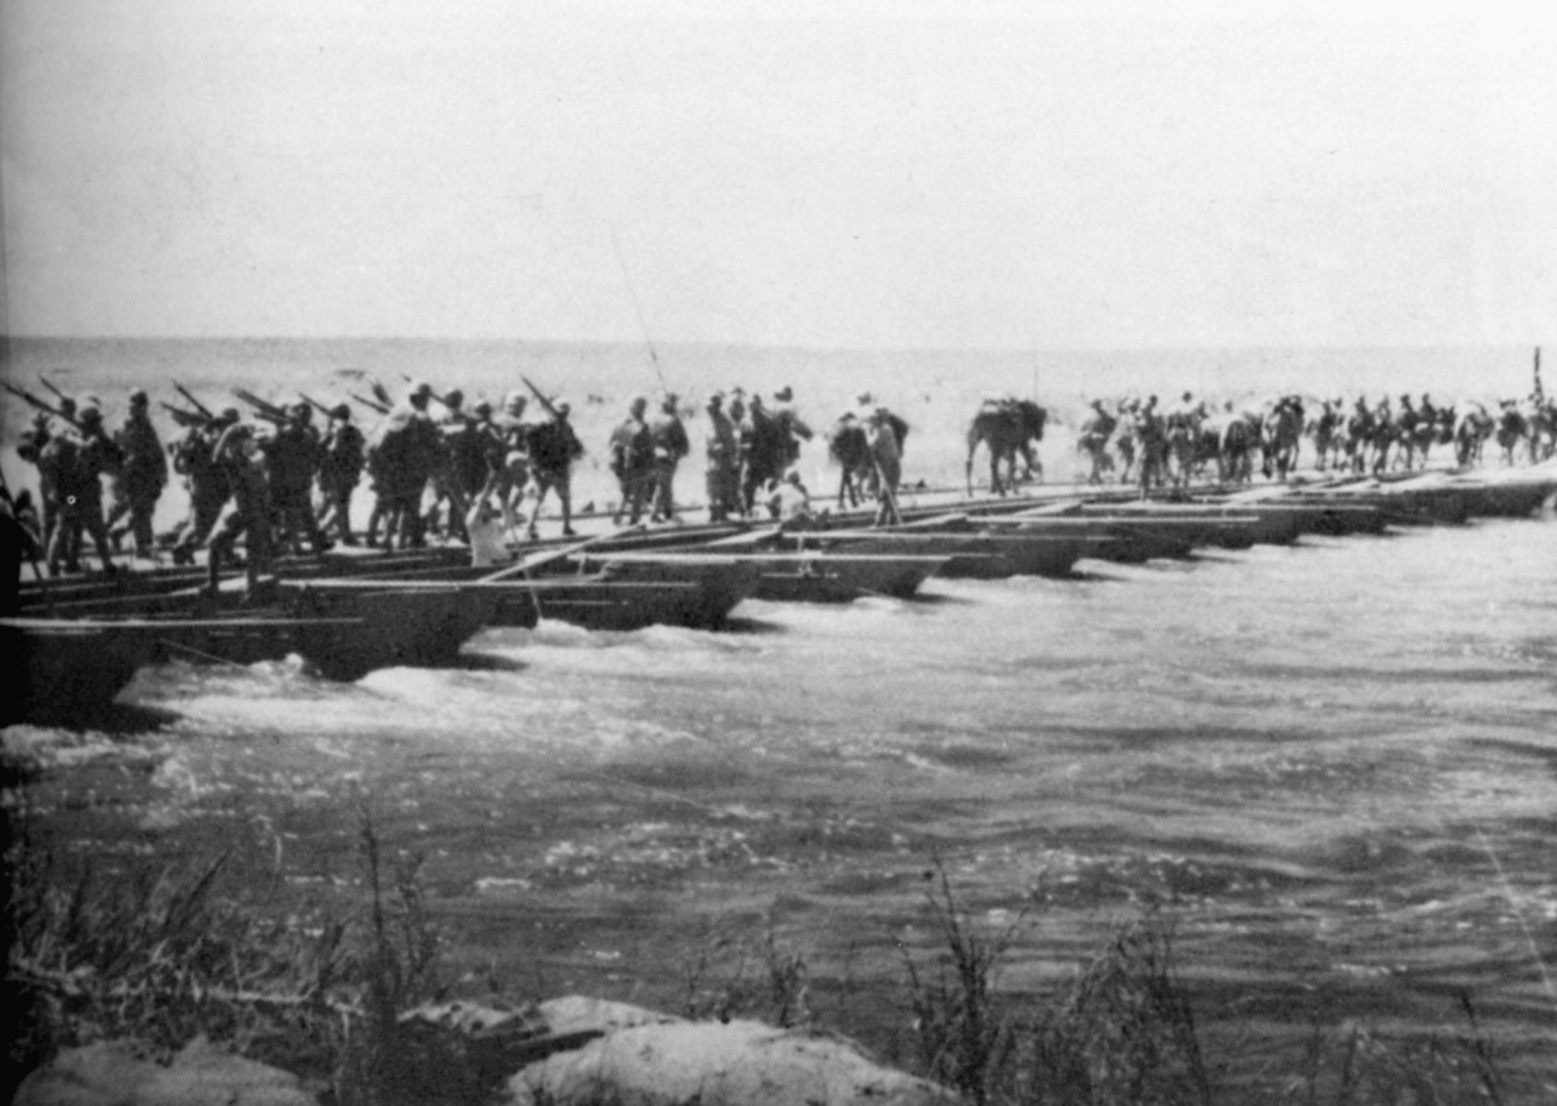 Japanese soldiers take advantage of a pontoon bridge and cross the Halha River on July 3, 1939.